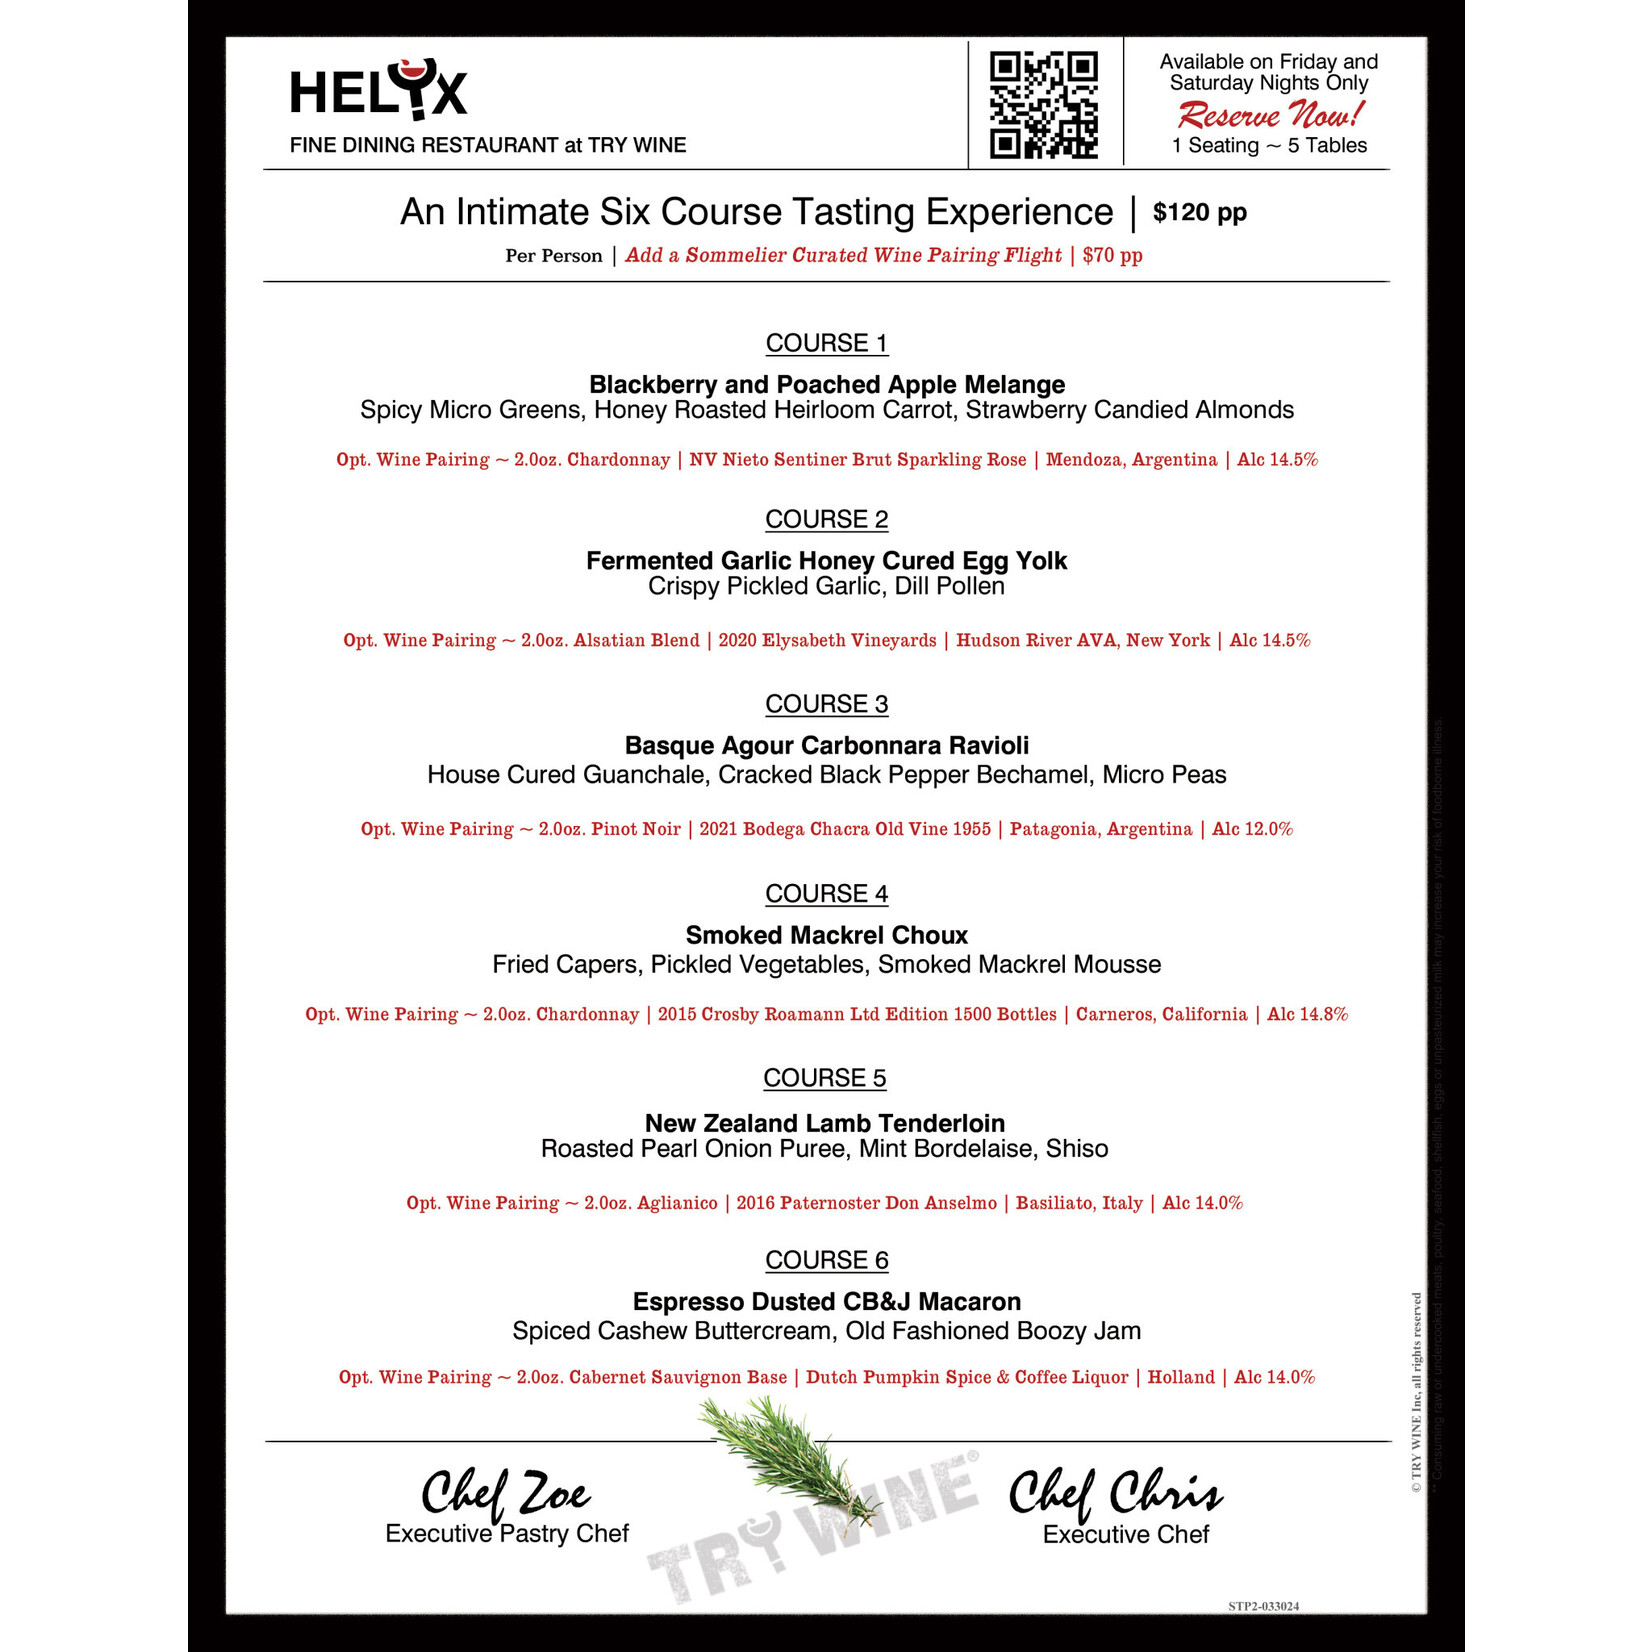 HELYX Restaurant 6 Course Tasting Experience ~ Saturday May 11th at 7:30pm ~ per person